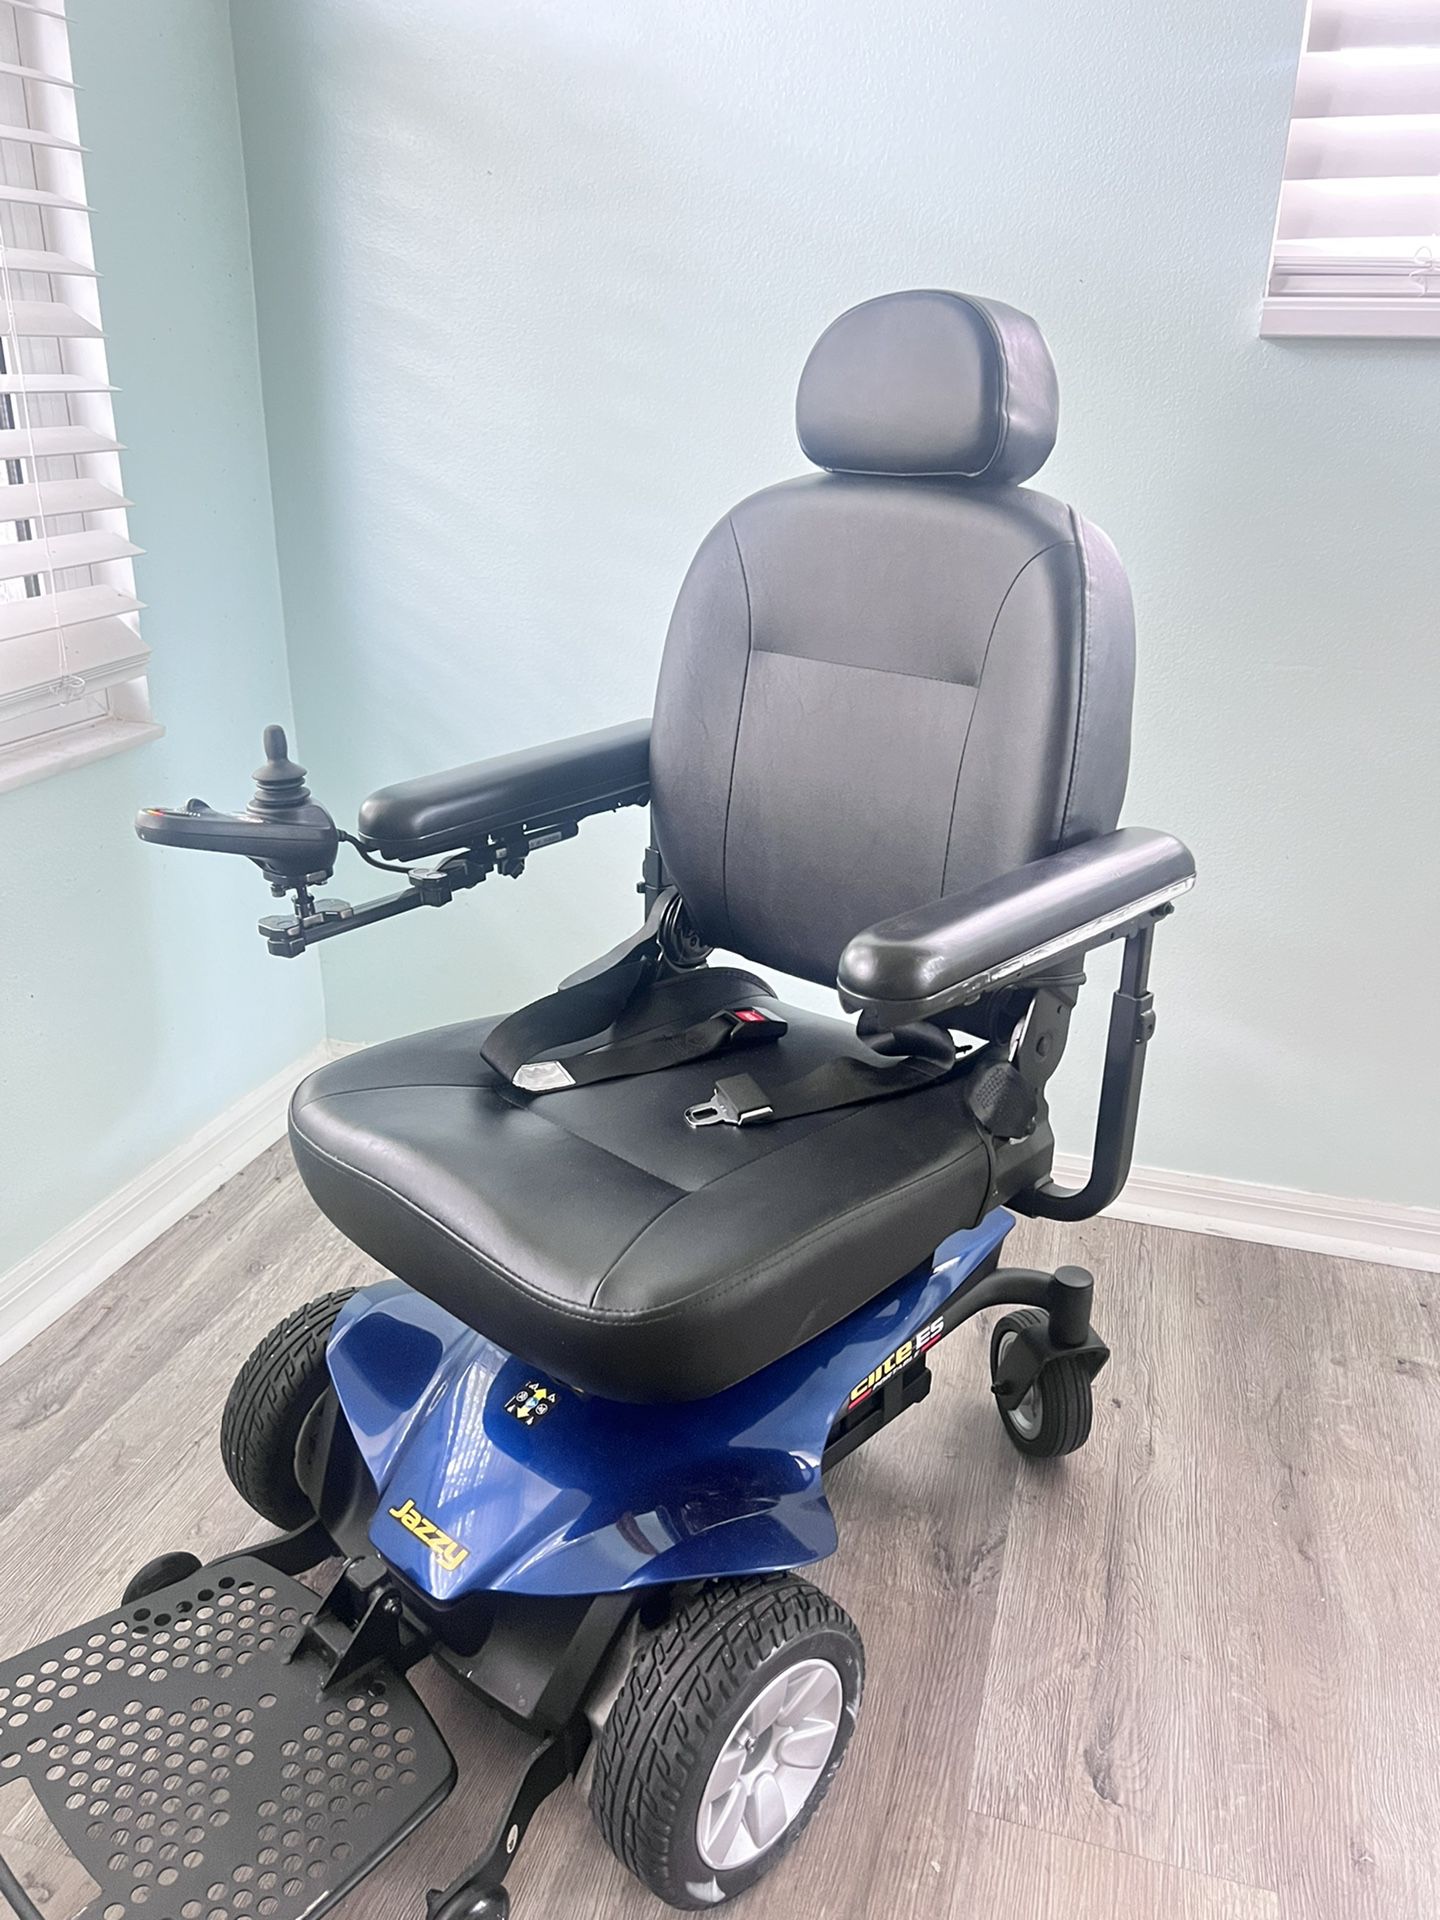 Motorized Office Chair